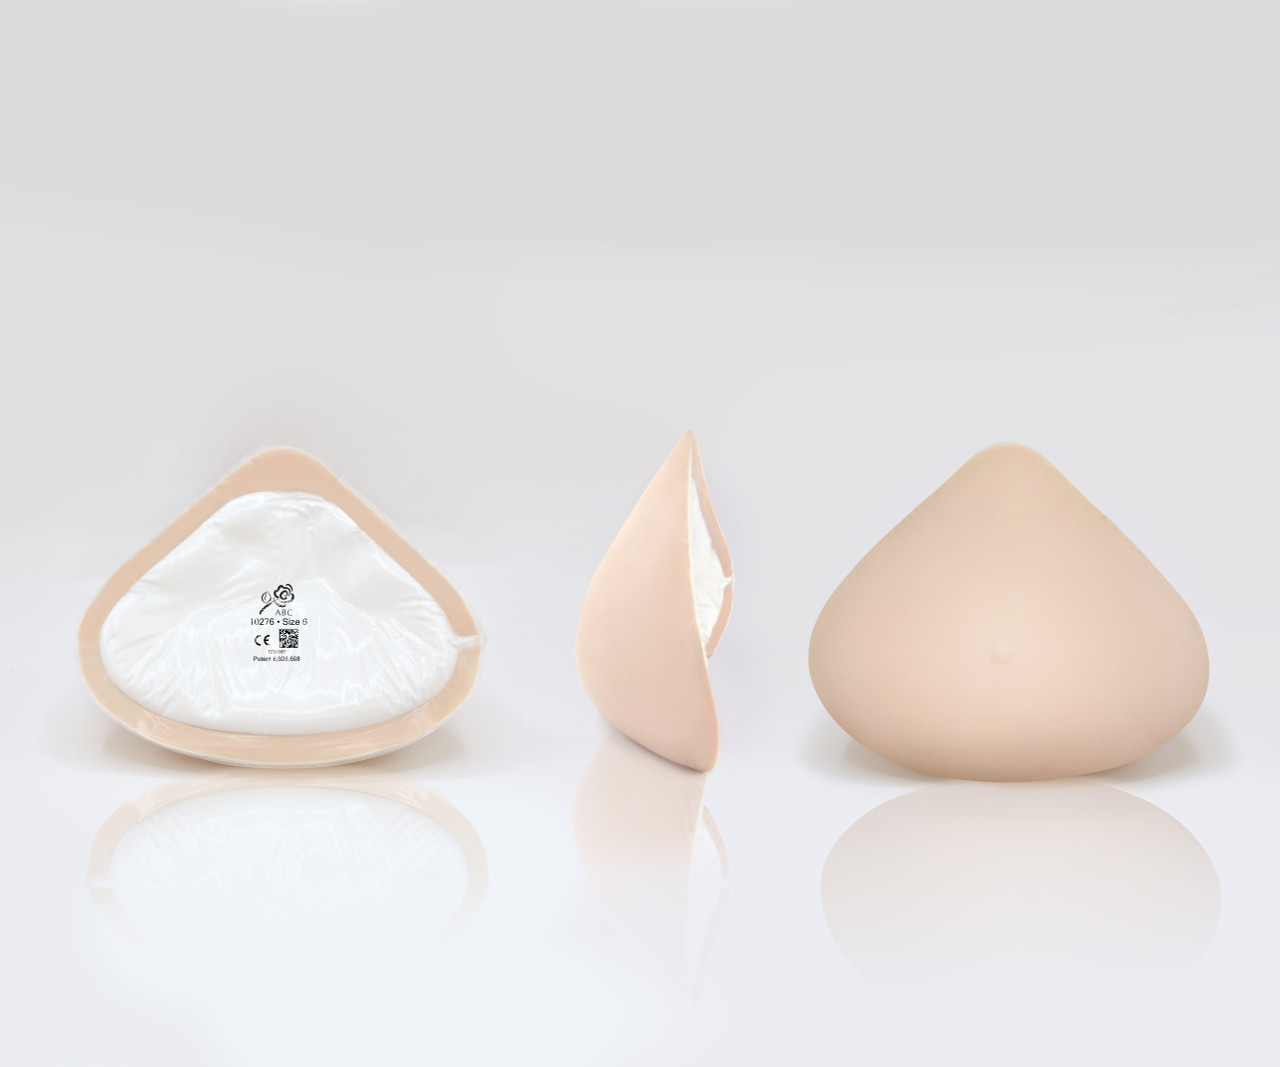 Buy New!!! ABC My Shape Triangle Breast Prosthesis Online